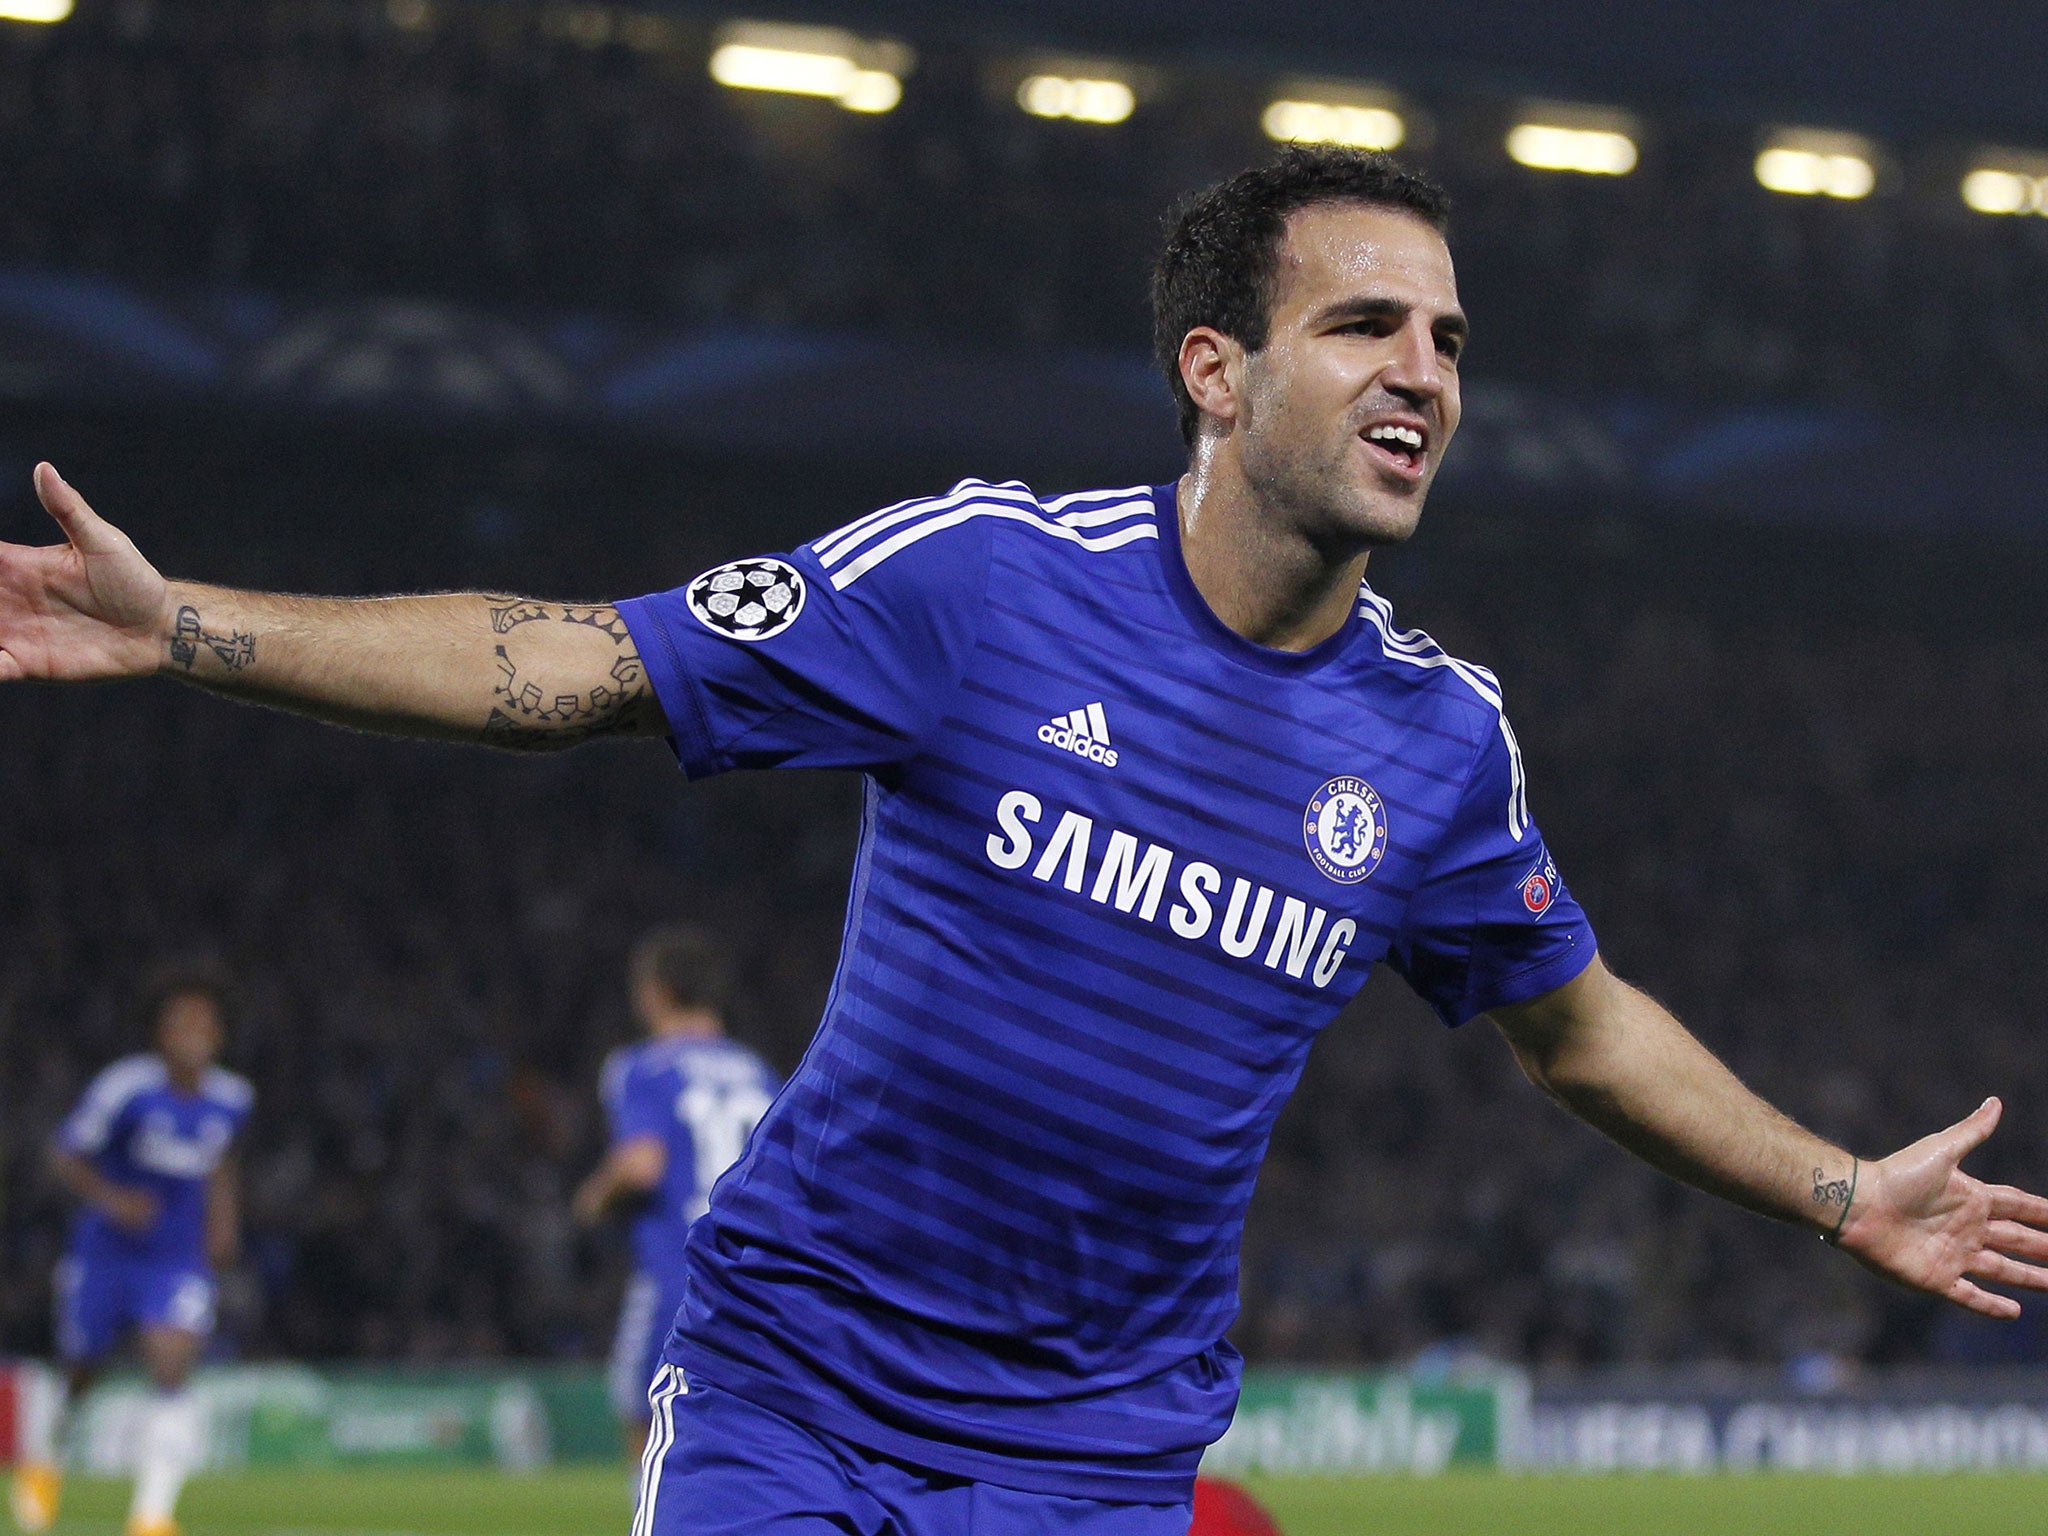 Cesc Fabregas has excelled for Chelsea